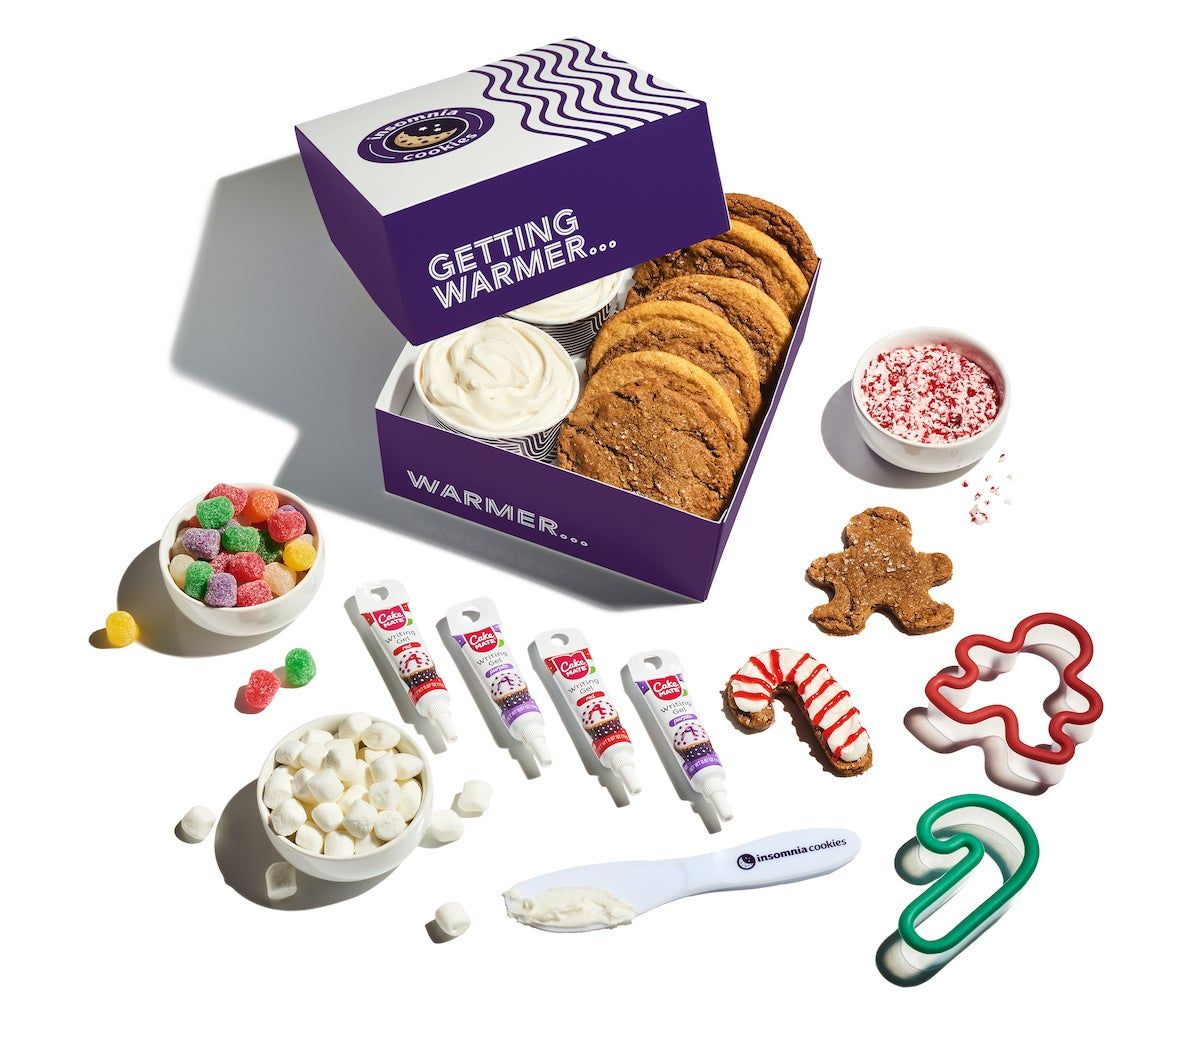 Kids December Cookie Class Experience DIY Kit - Available from 12